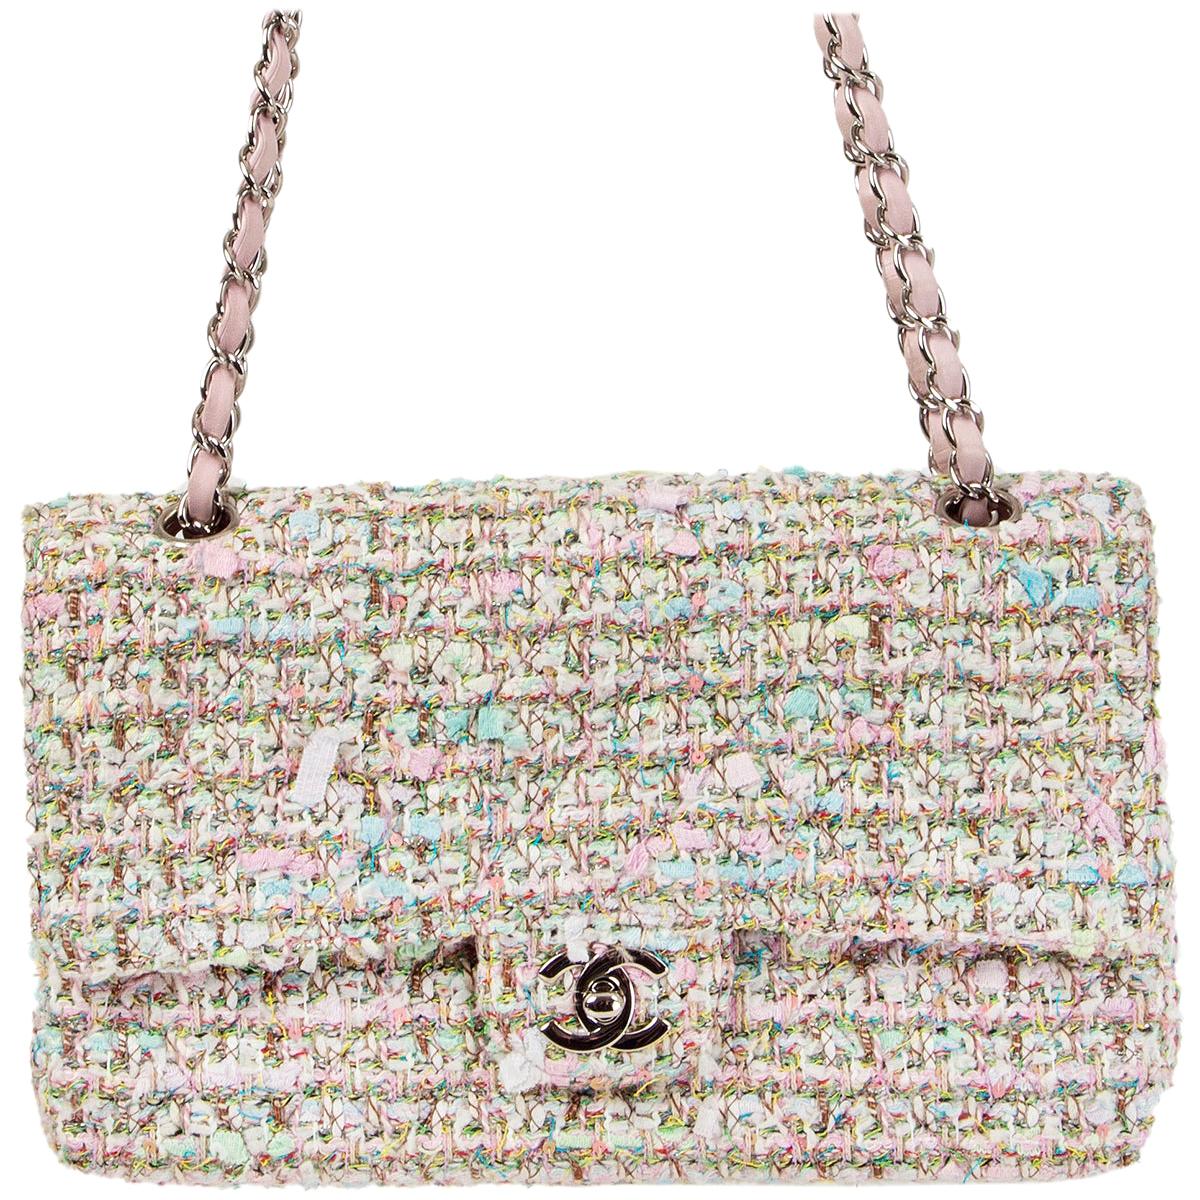 Timeless/classique tweed crossbody bag Chanel Multicolour in Tweed -  31489557